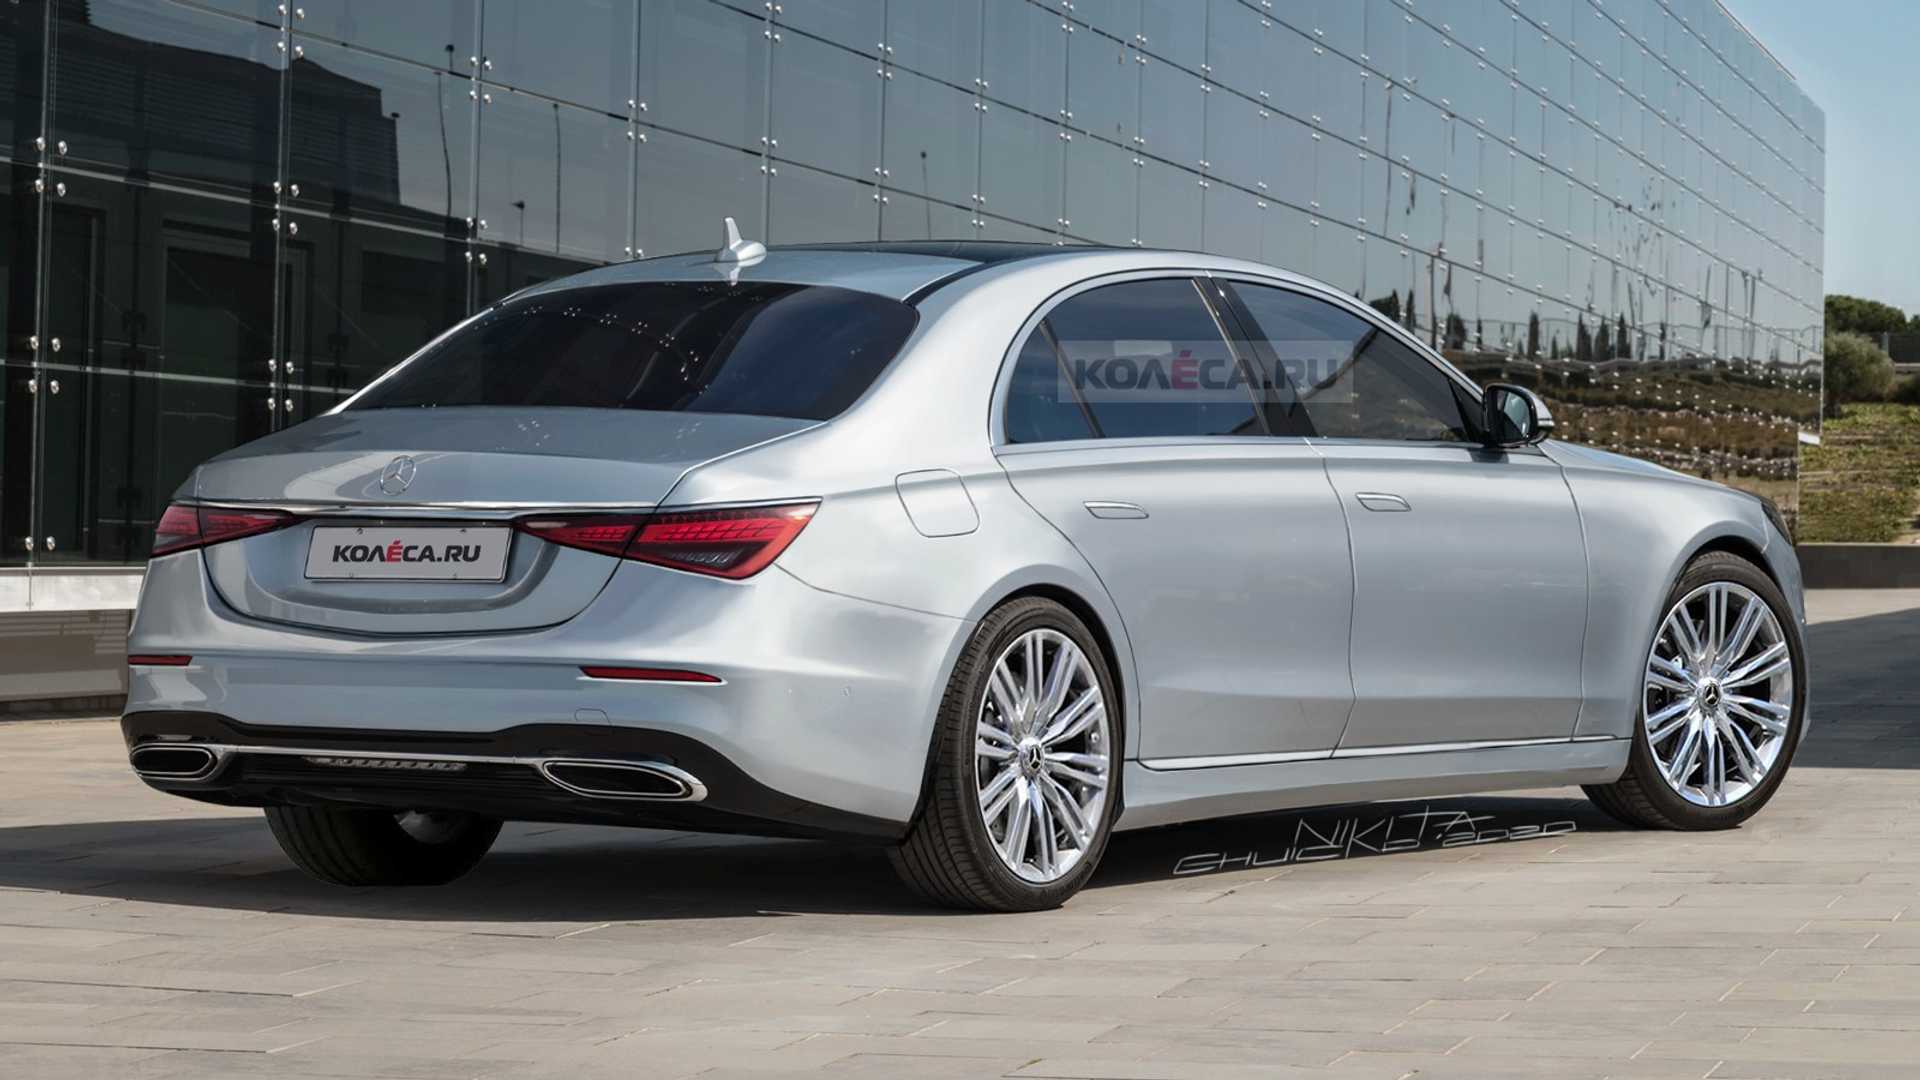 S63 w223. Мерседес w223 s-класса. Мерседес s class w223. Новый s класс Мерседес 2021. Mercedes Benz s 223.